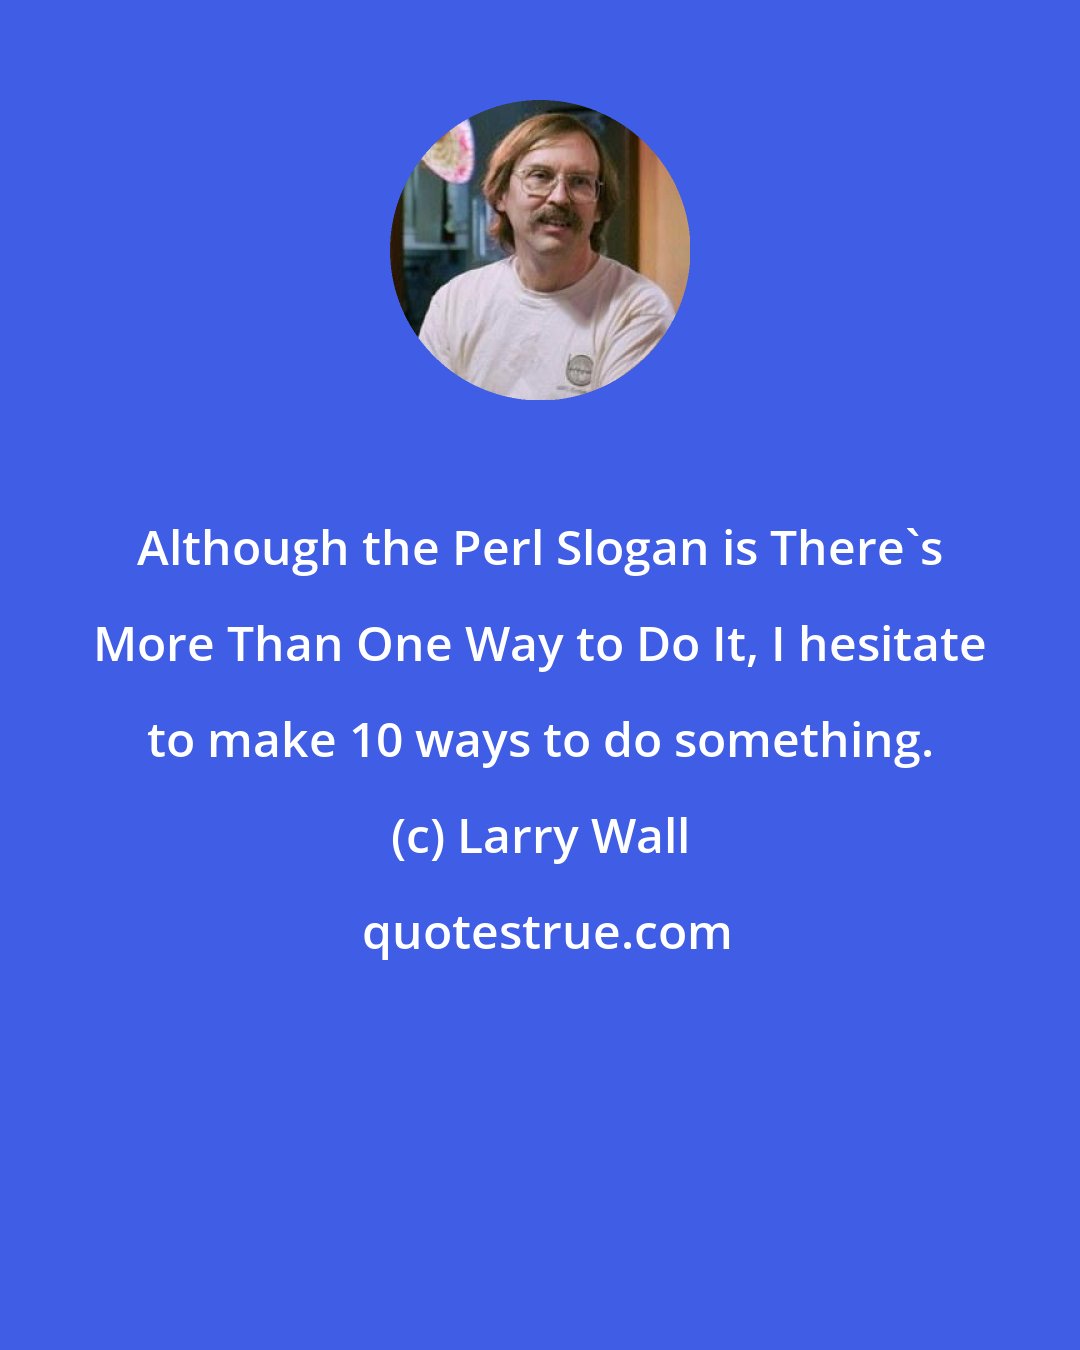 Larry Wall: Although the Perl Slogan is There's More Than One Way to Do It, I hesitate to make 10 ways to do something.